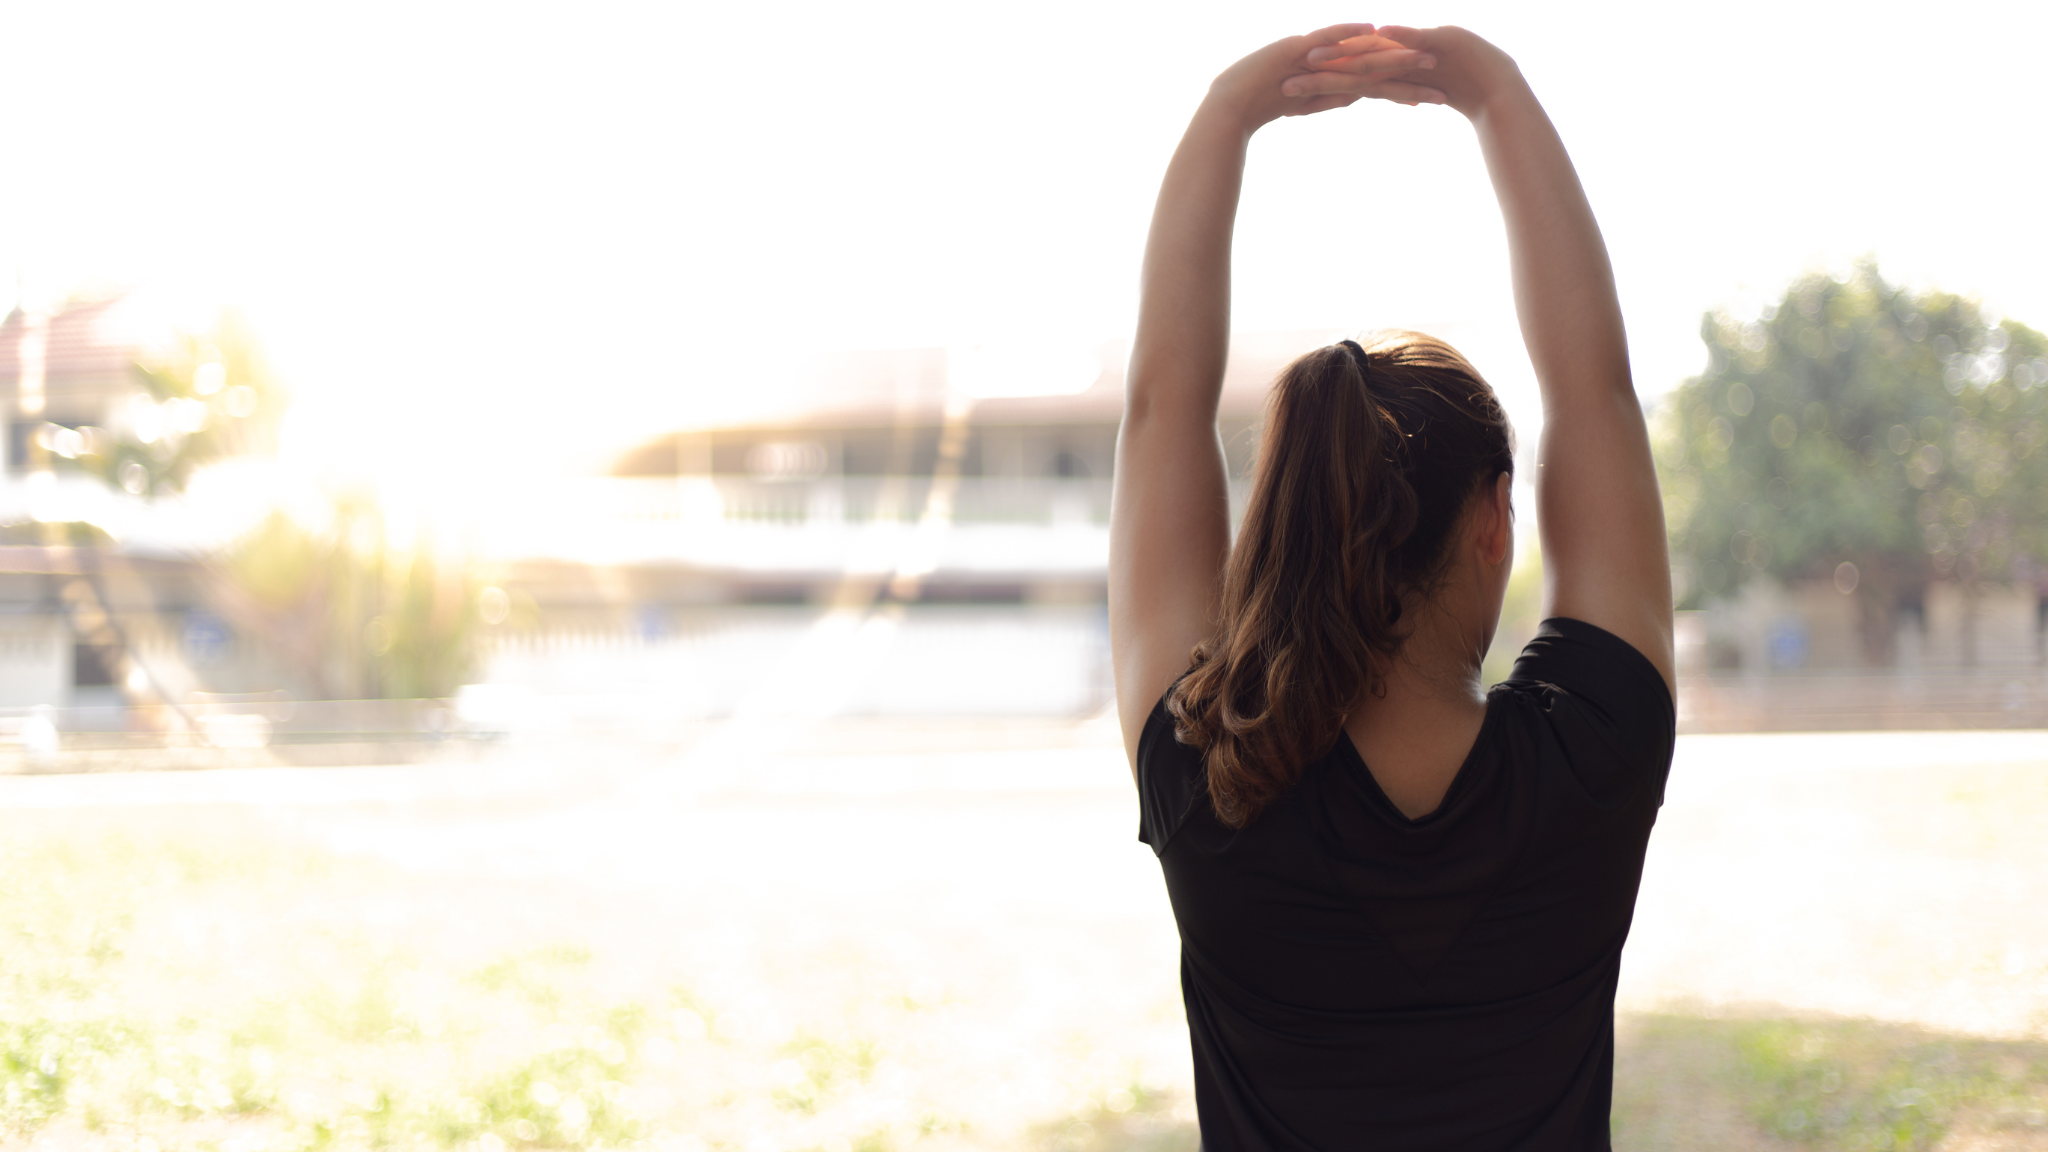 Is Stretching Good for Your Heart? | How 12 Weeks of Stretching Can Improve Your Heart Health